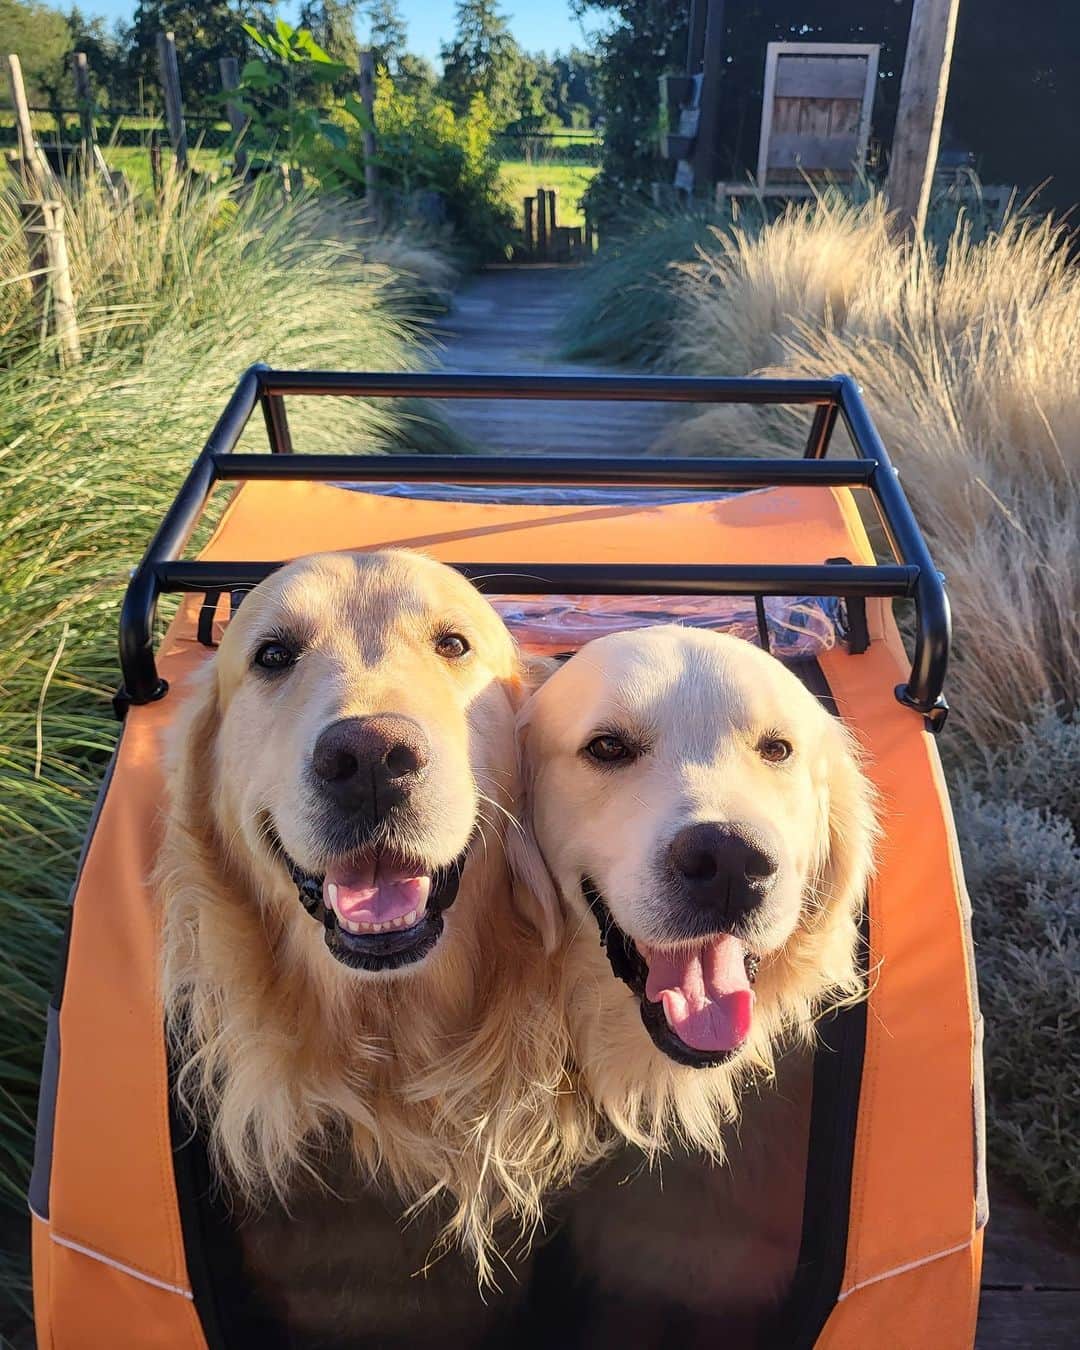 8crapのインスタグラム：「Do you want to join us for a ride? - Want to get featured like them? Join “The Barked Club” on FACEBOOK and post something now! 👉 barked.com - 📷 @buckleyramses - #TheBarkedClub #barked #dog #doggo #GoldenRetriever #GoldenRetrievers」